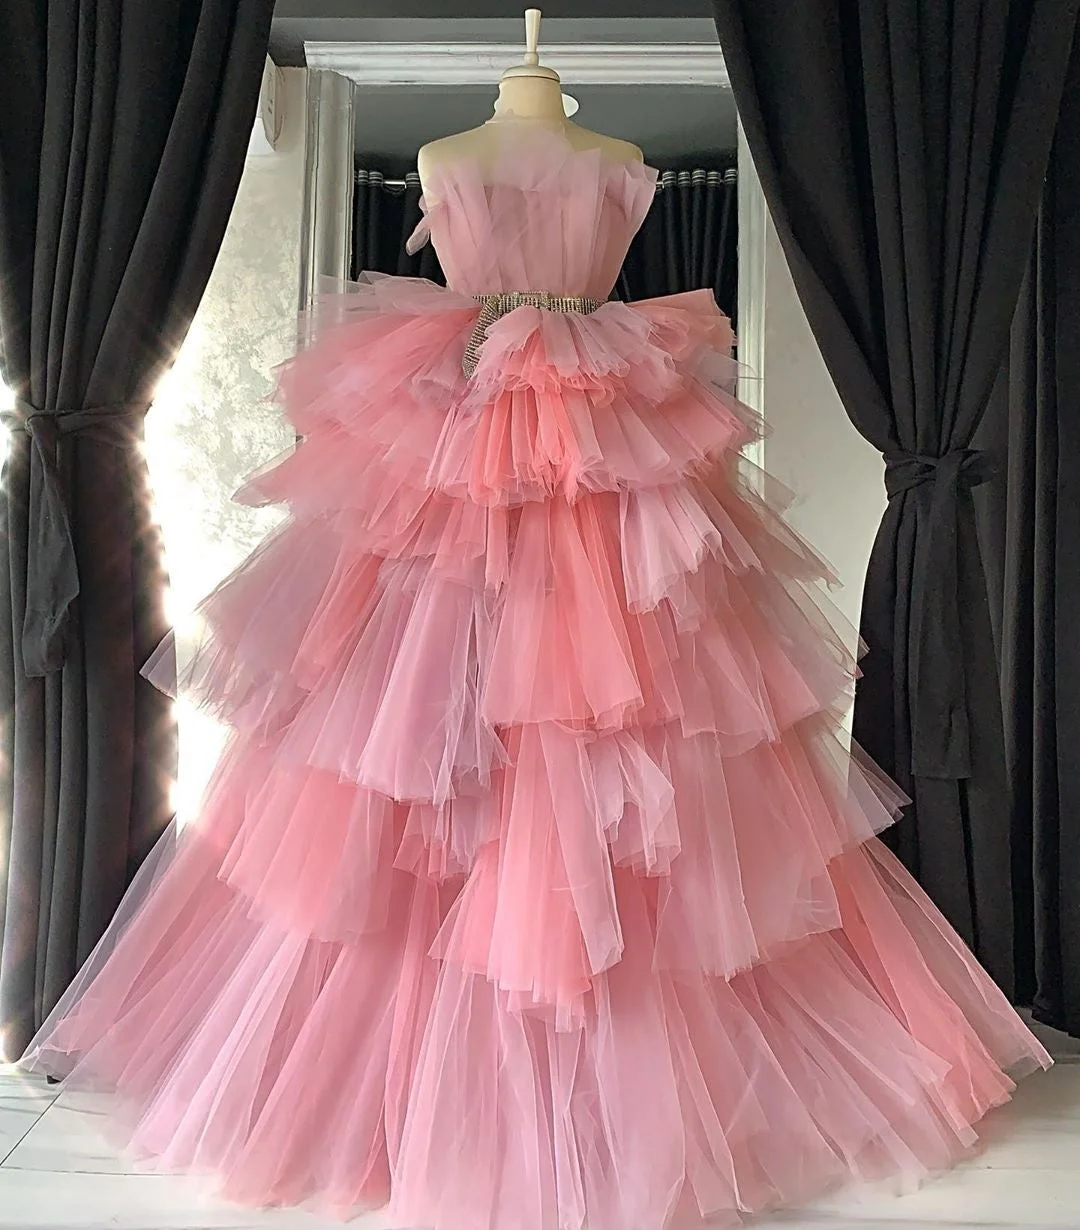 Pink Tulle Candy Dress